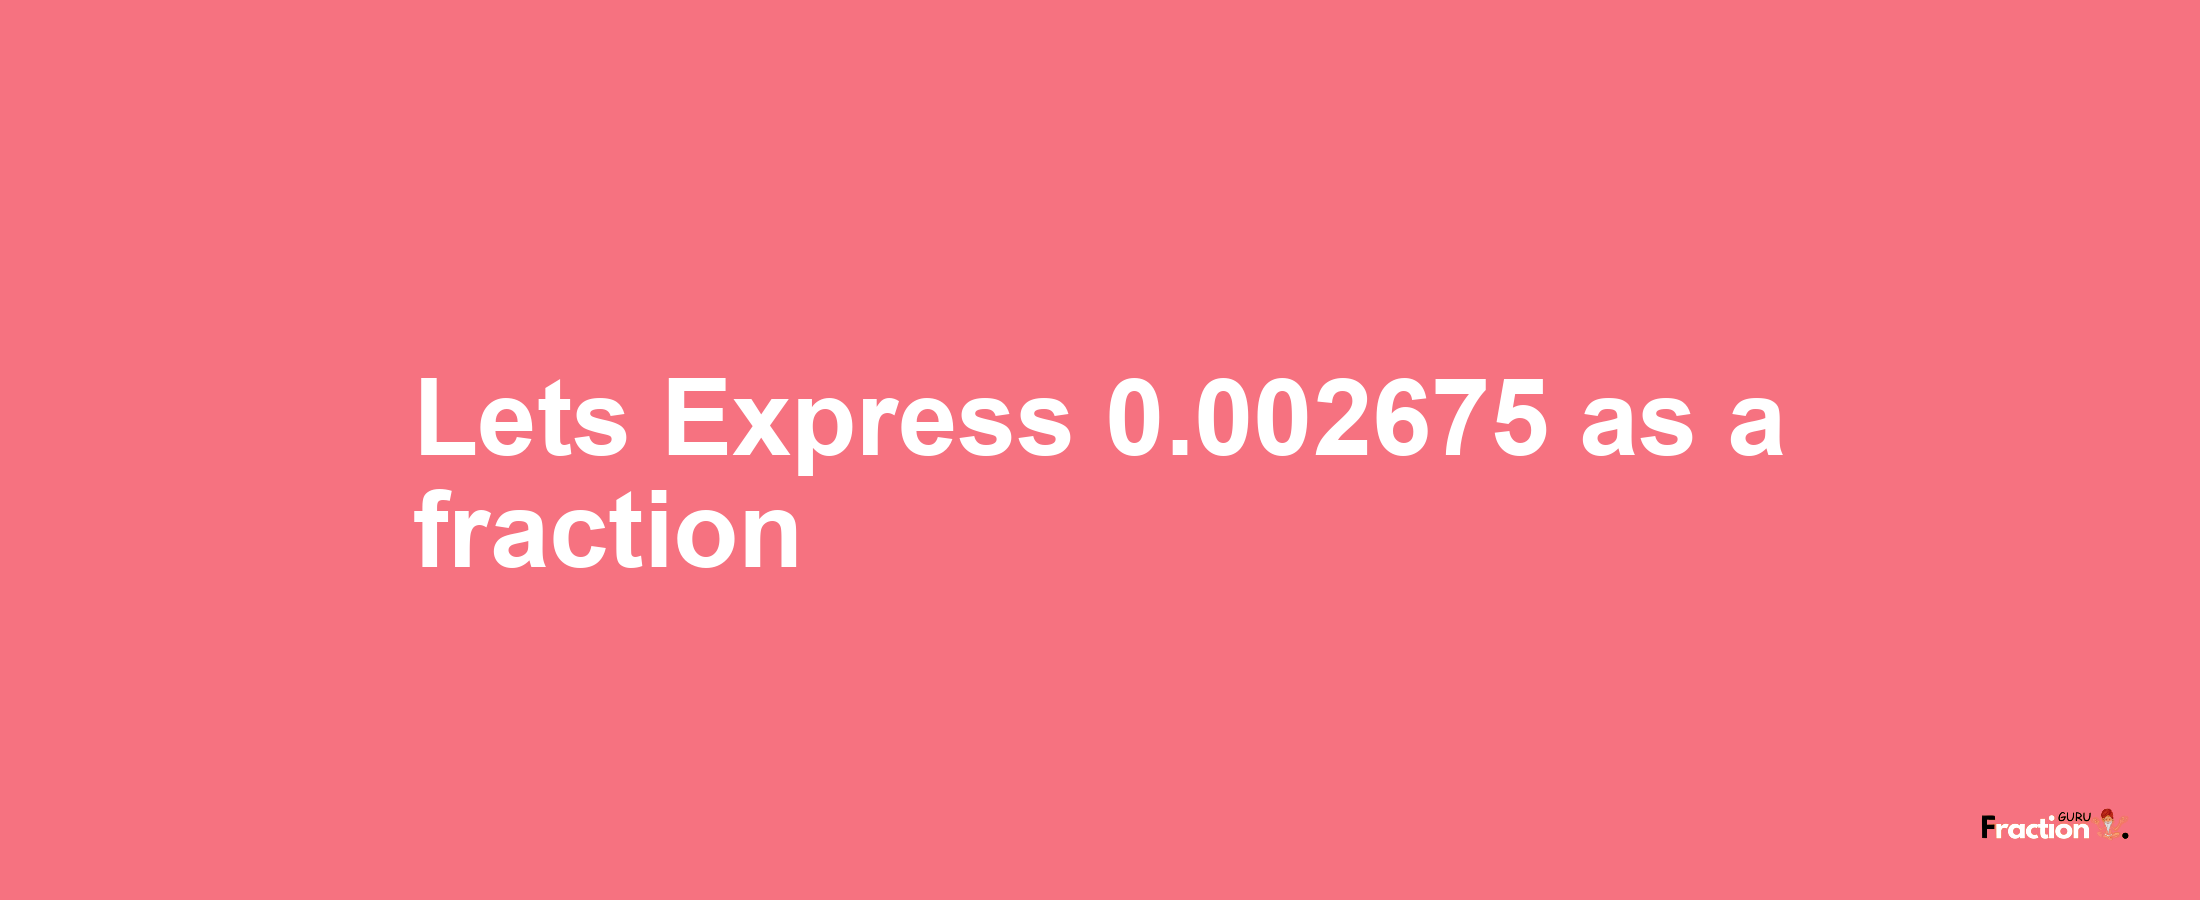 Lets Express 0.002675 as afraction